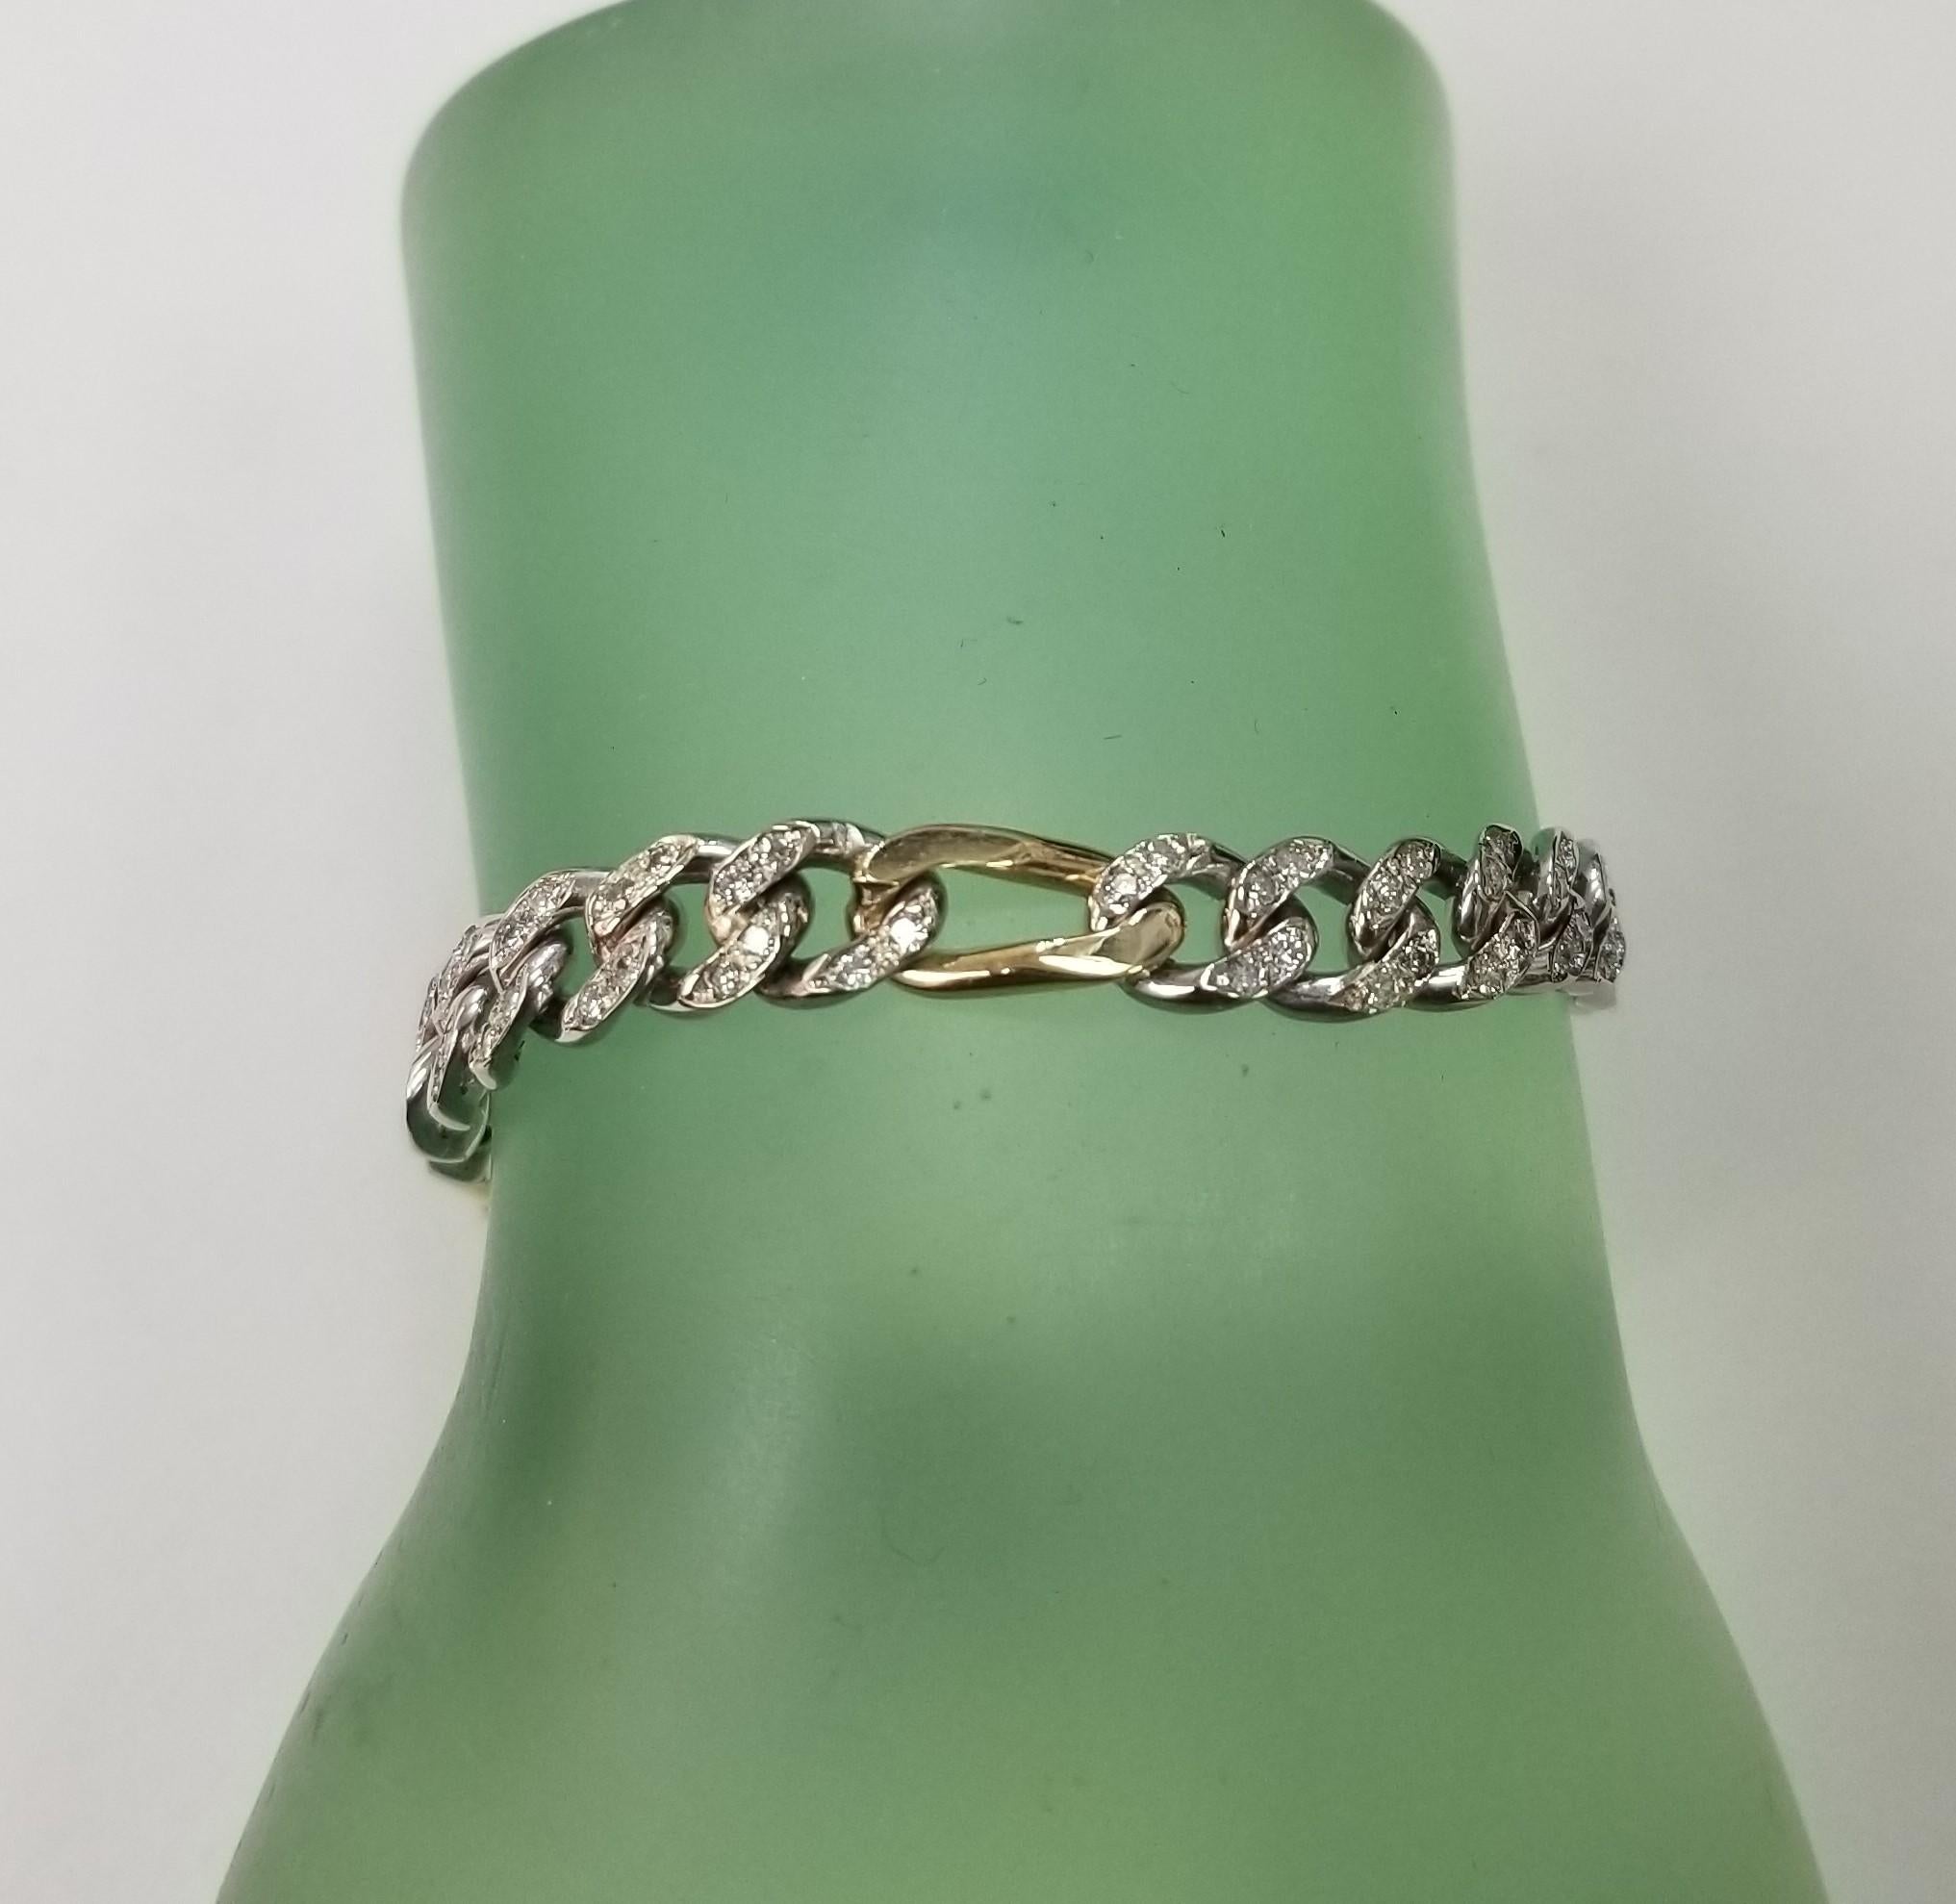 18K White & Yellow Gold Link Style Pave' Diamond Bracelet weighing 1.10cts. In Excellent Condition For Sale In Los Angeles, CA